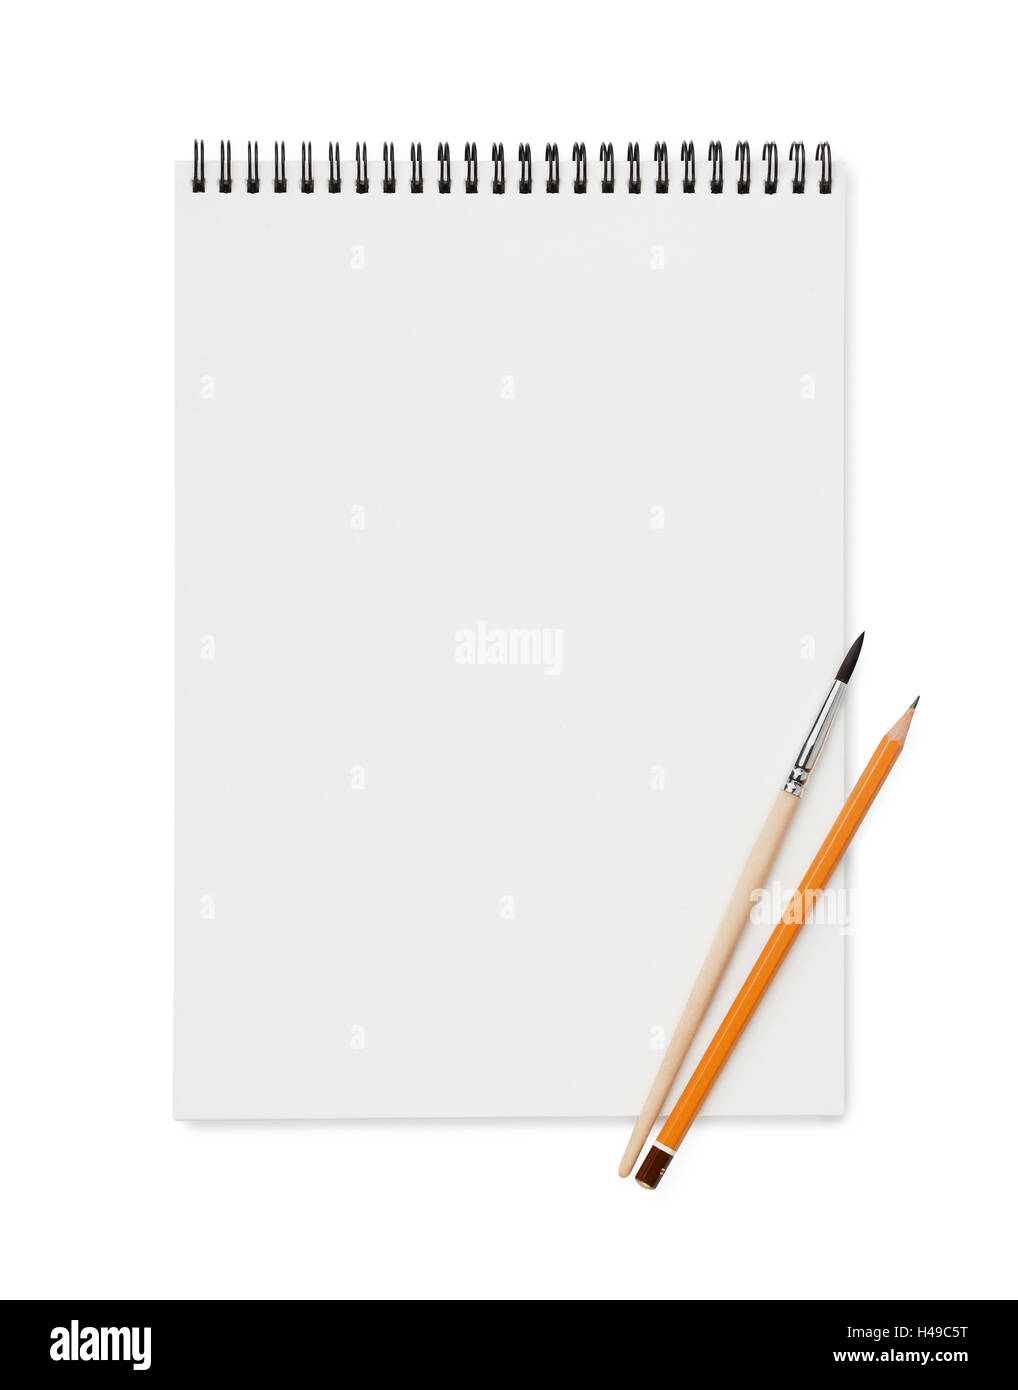 https://c8.alamy.com/comp/H49C5T/top-view-of-blank-sketchbook-with-pencil-and-brush-isolated-on-white-H49C5T.jpg